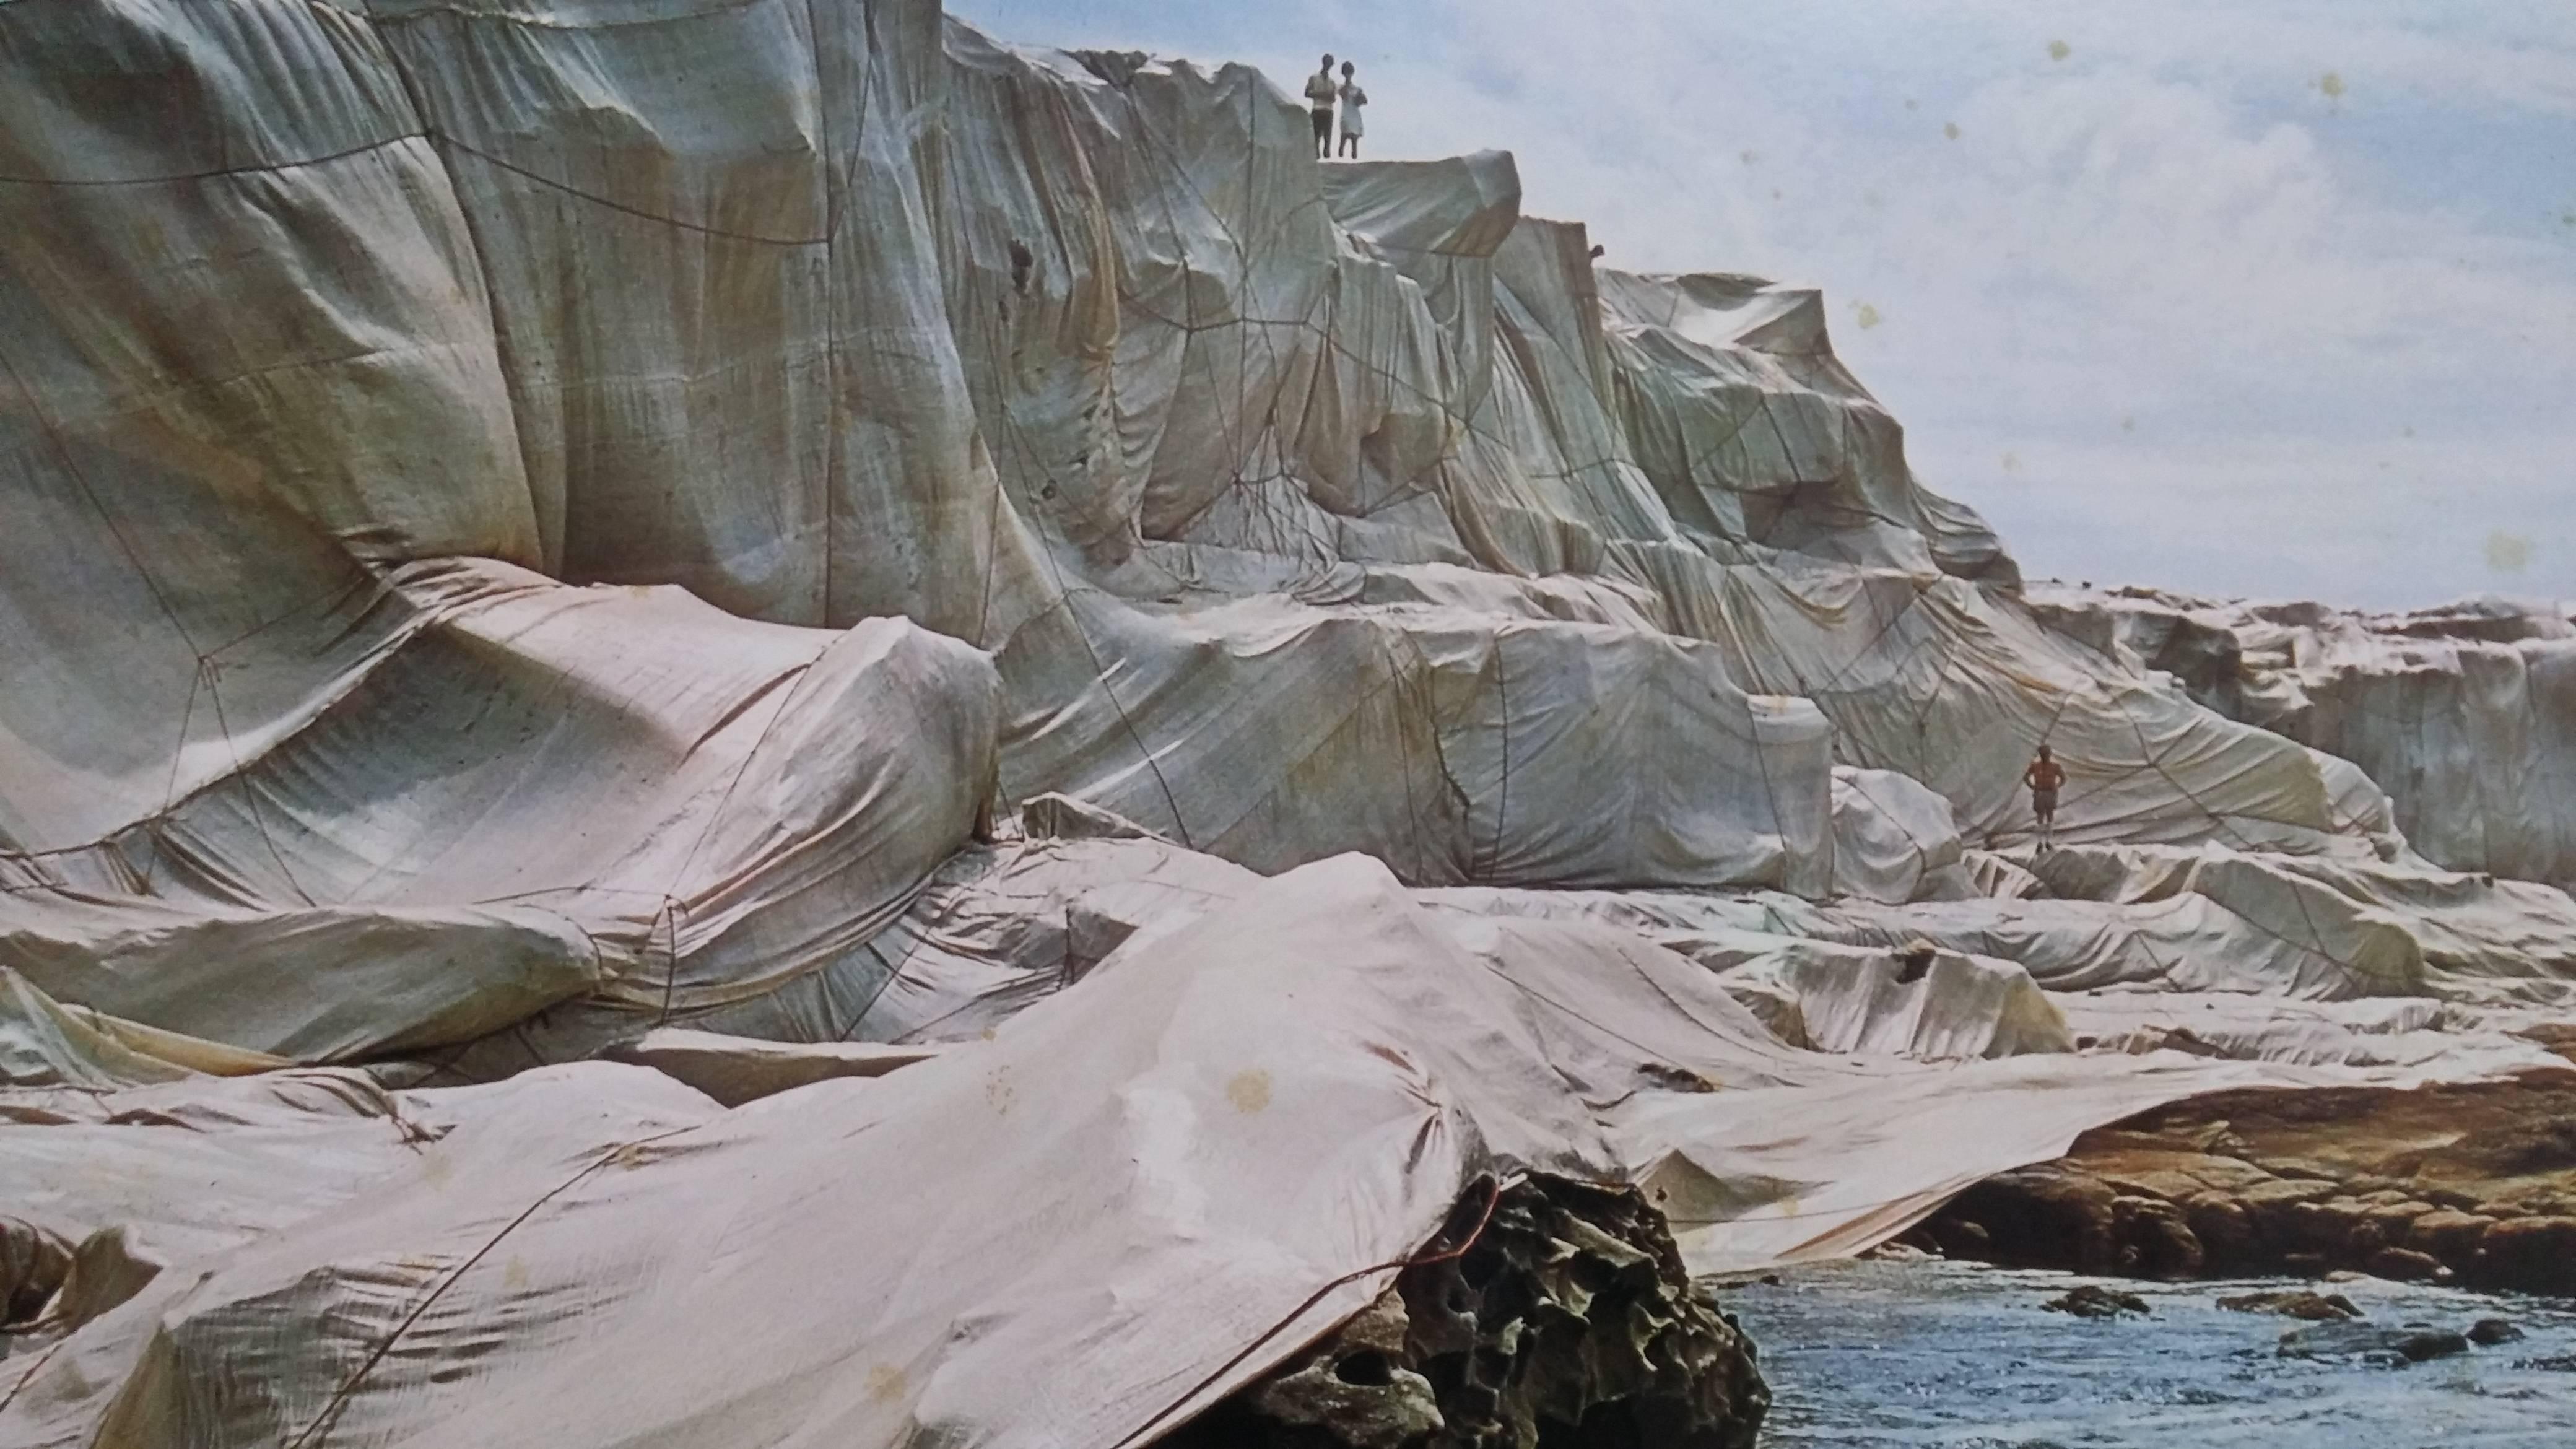 Wrapped Coast in Australia, 1990 - Photograph by Unknown